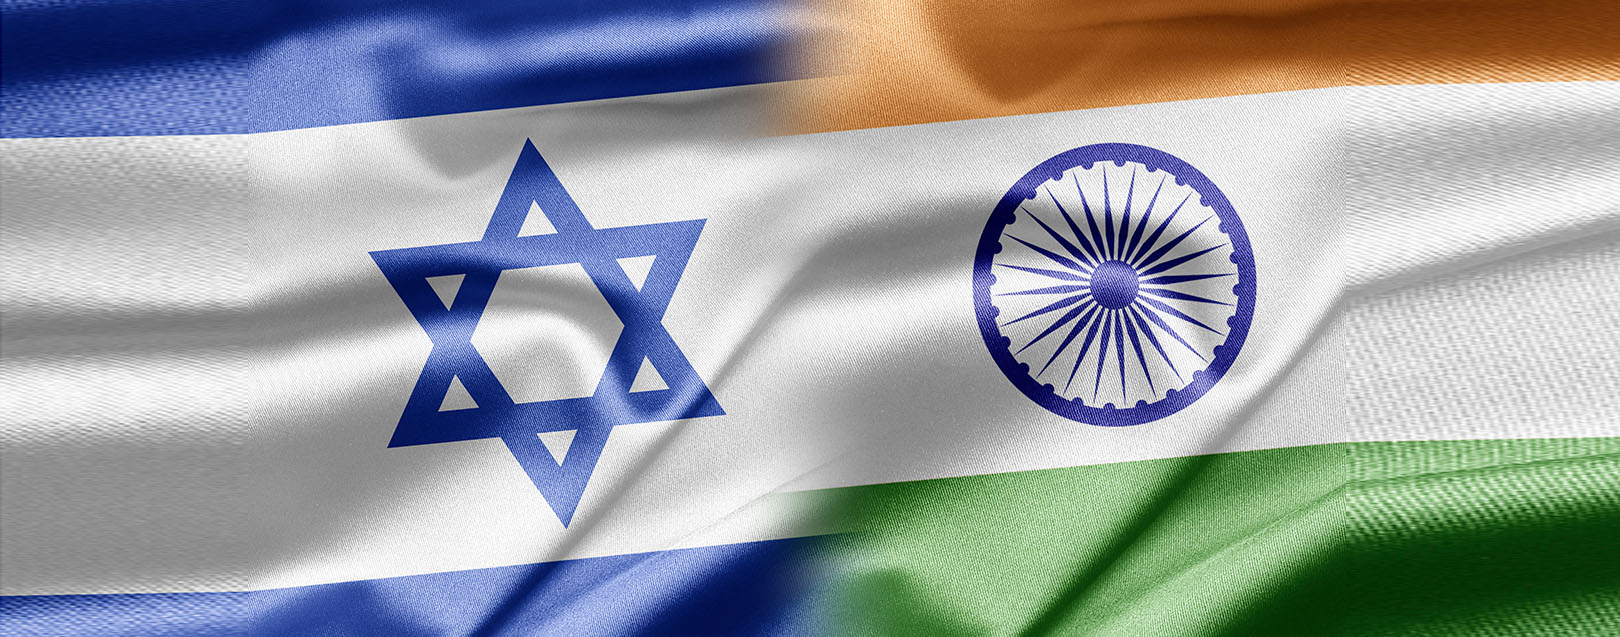 India to buy $2 billion missile systems from Israel